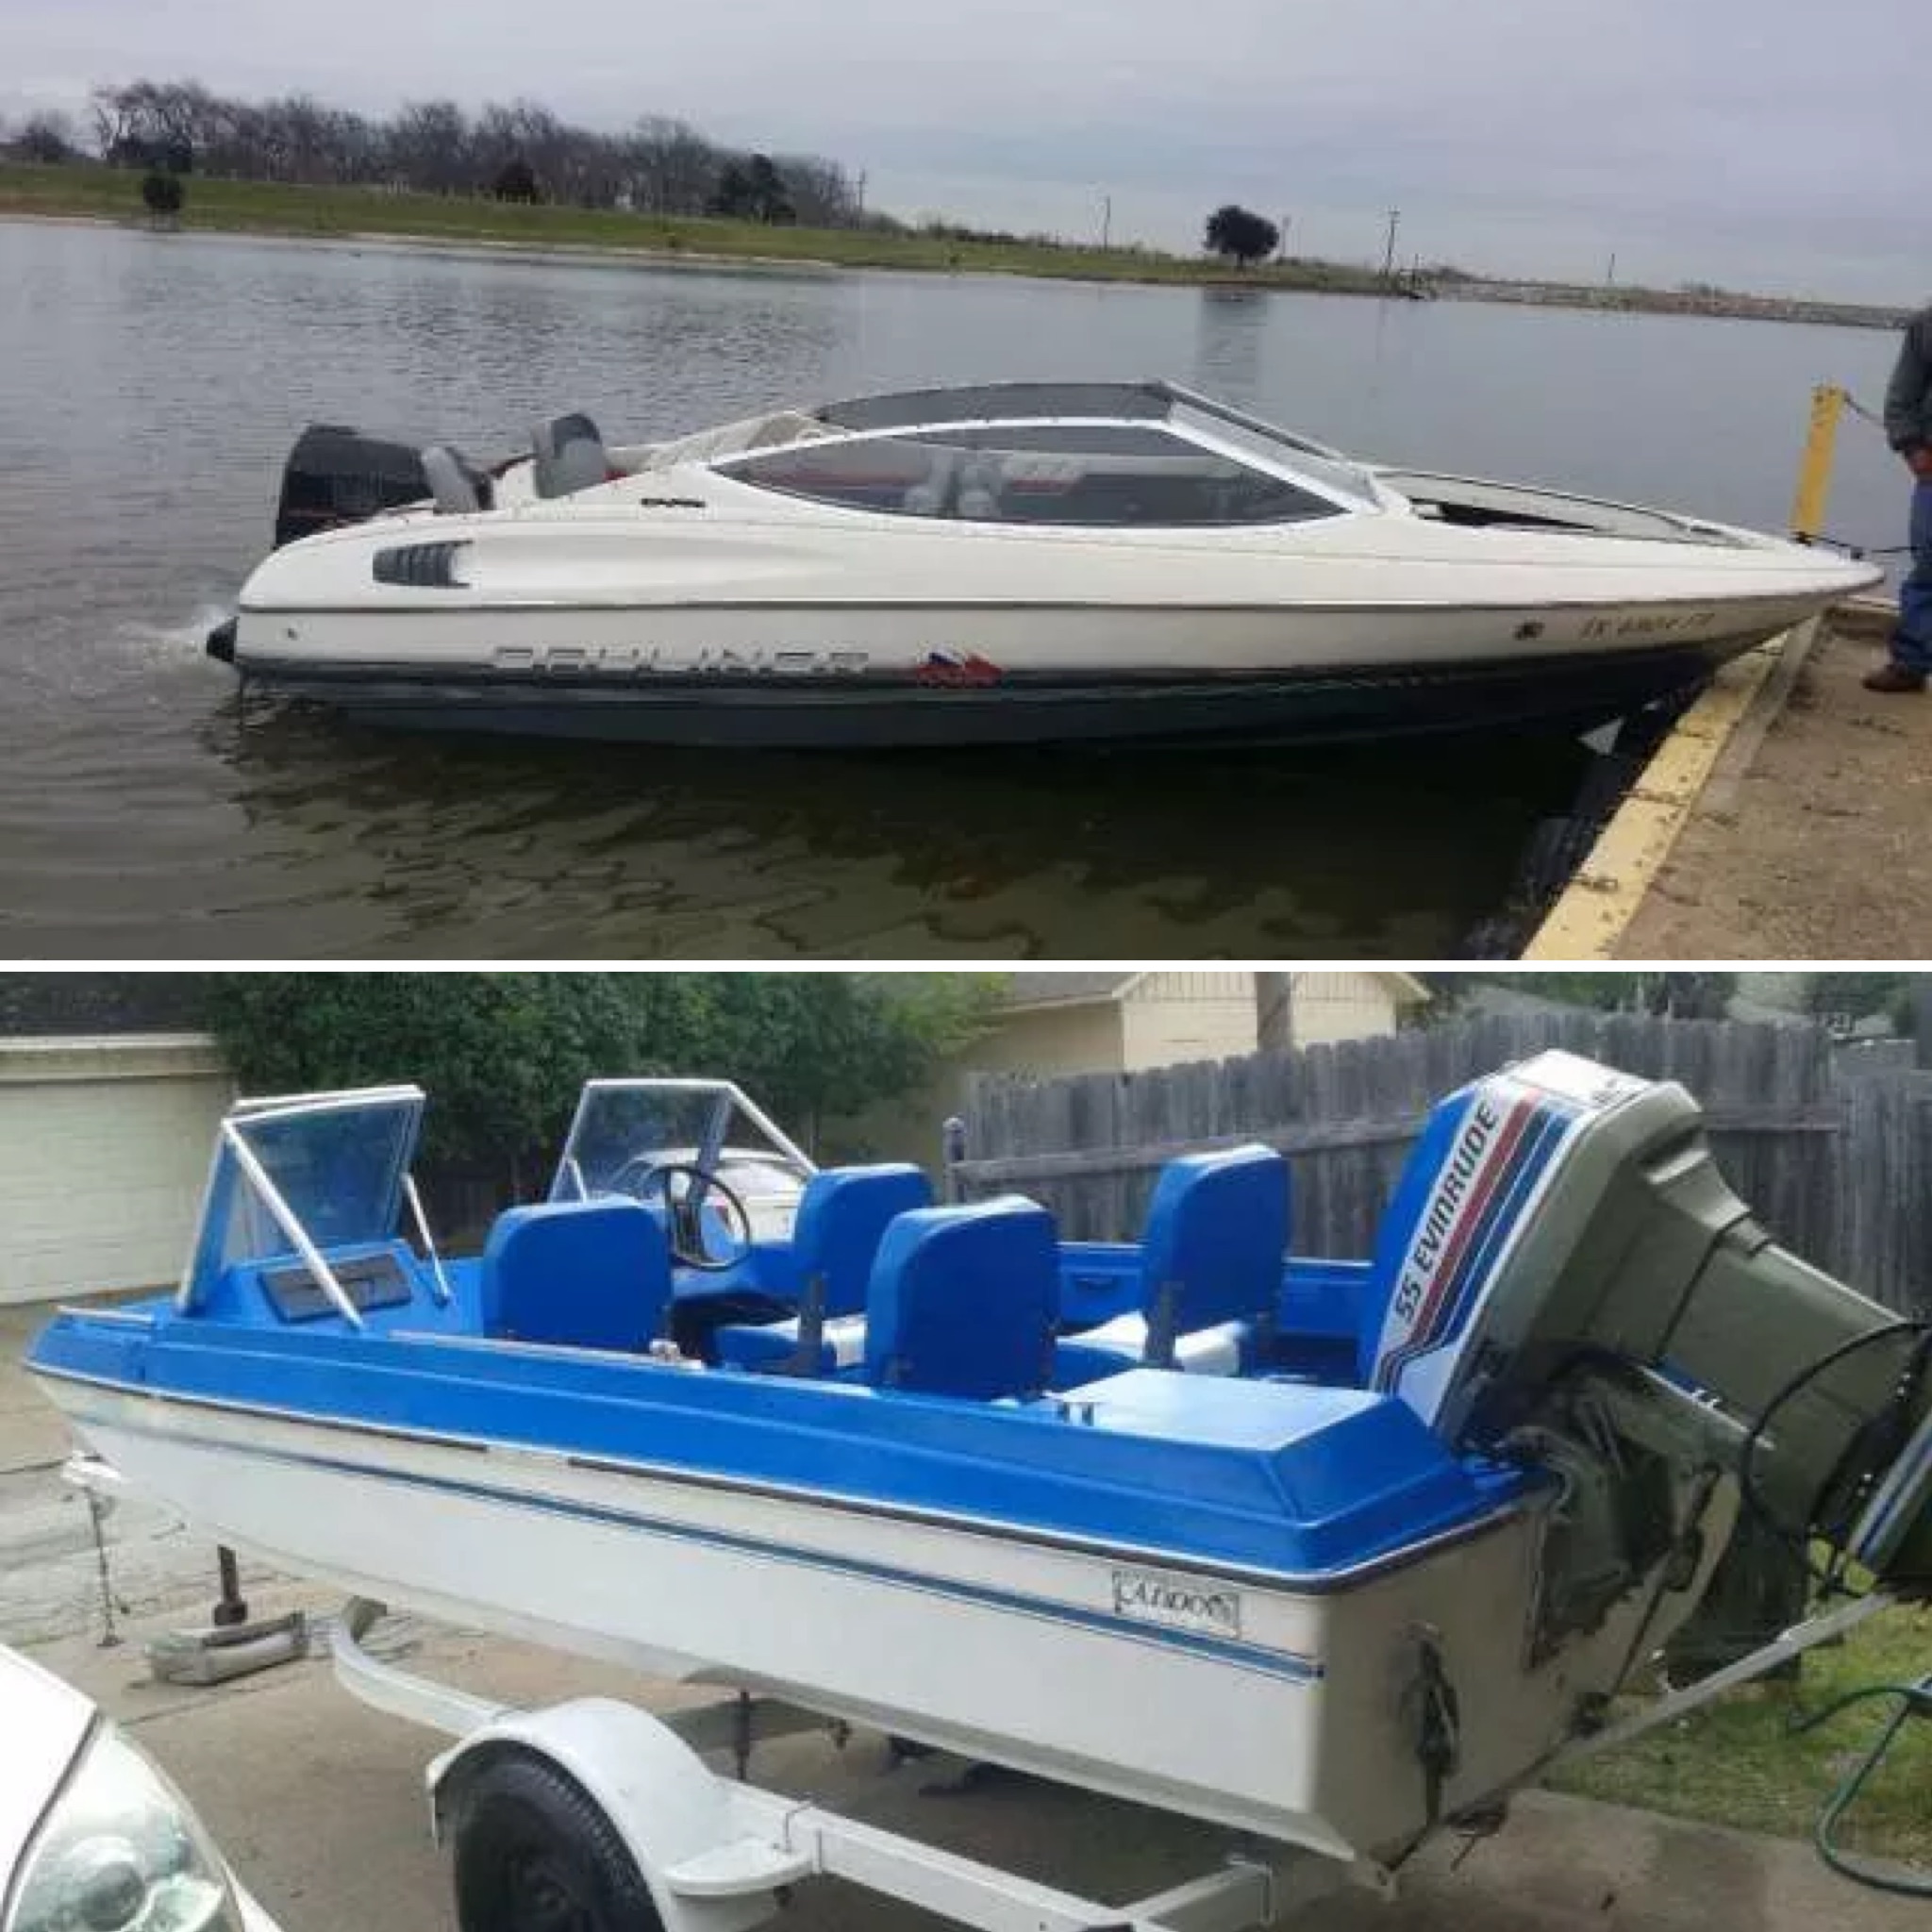 A 1990 Bayliner with trailer ($3,000) vs. a fully-reconditioned 1977 Caddo ($3,200)